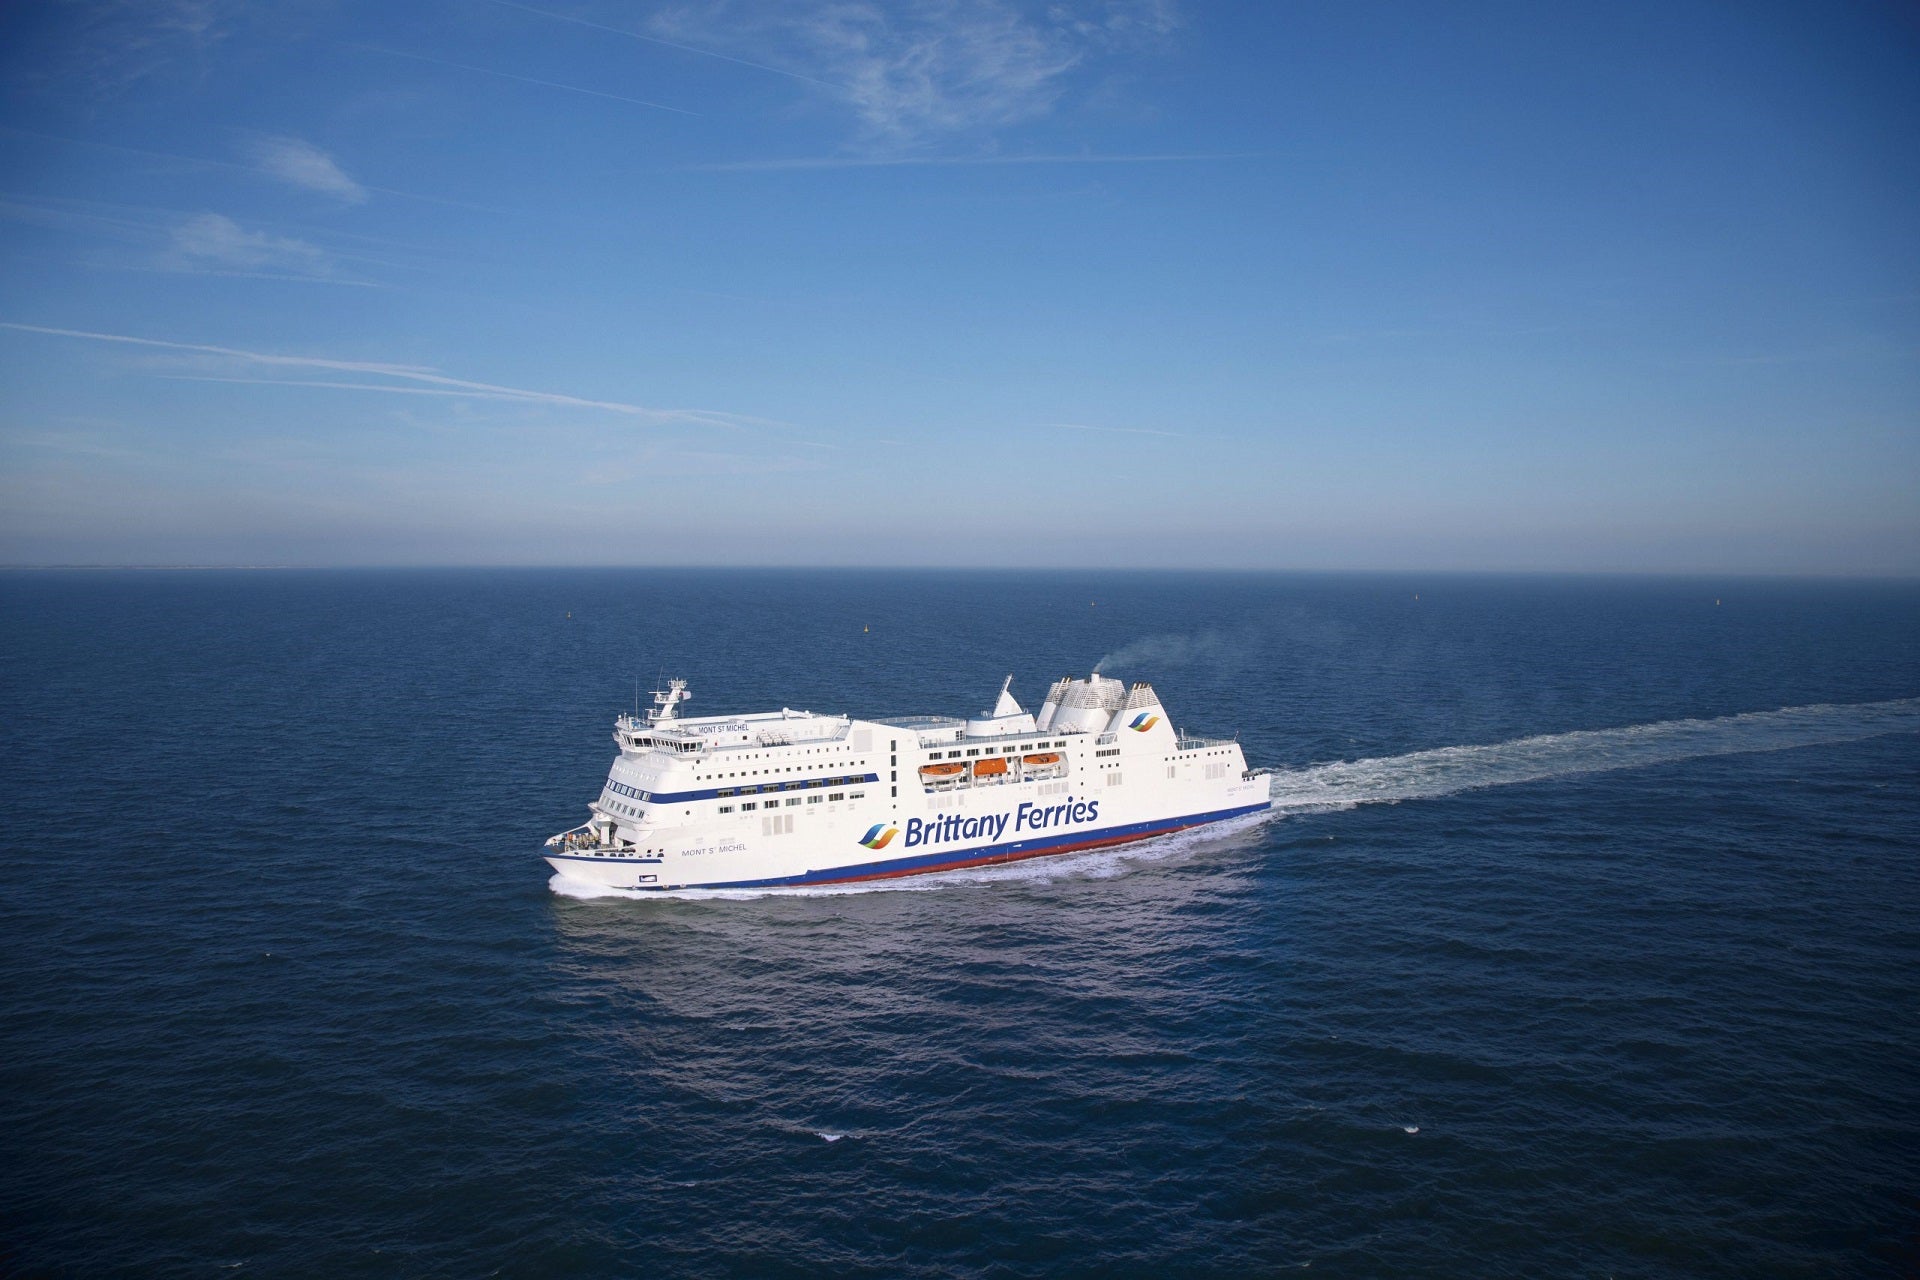 CMA CGM invests in Brittany Ferries to enable its post-Covid recovery